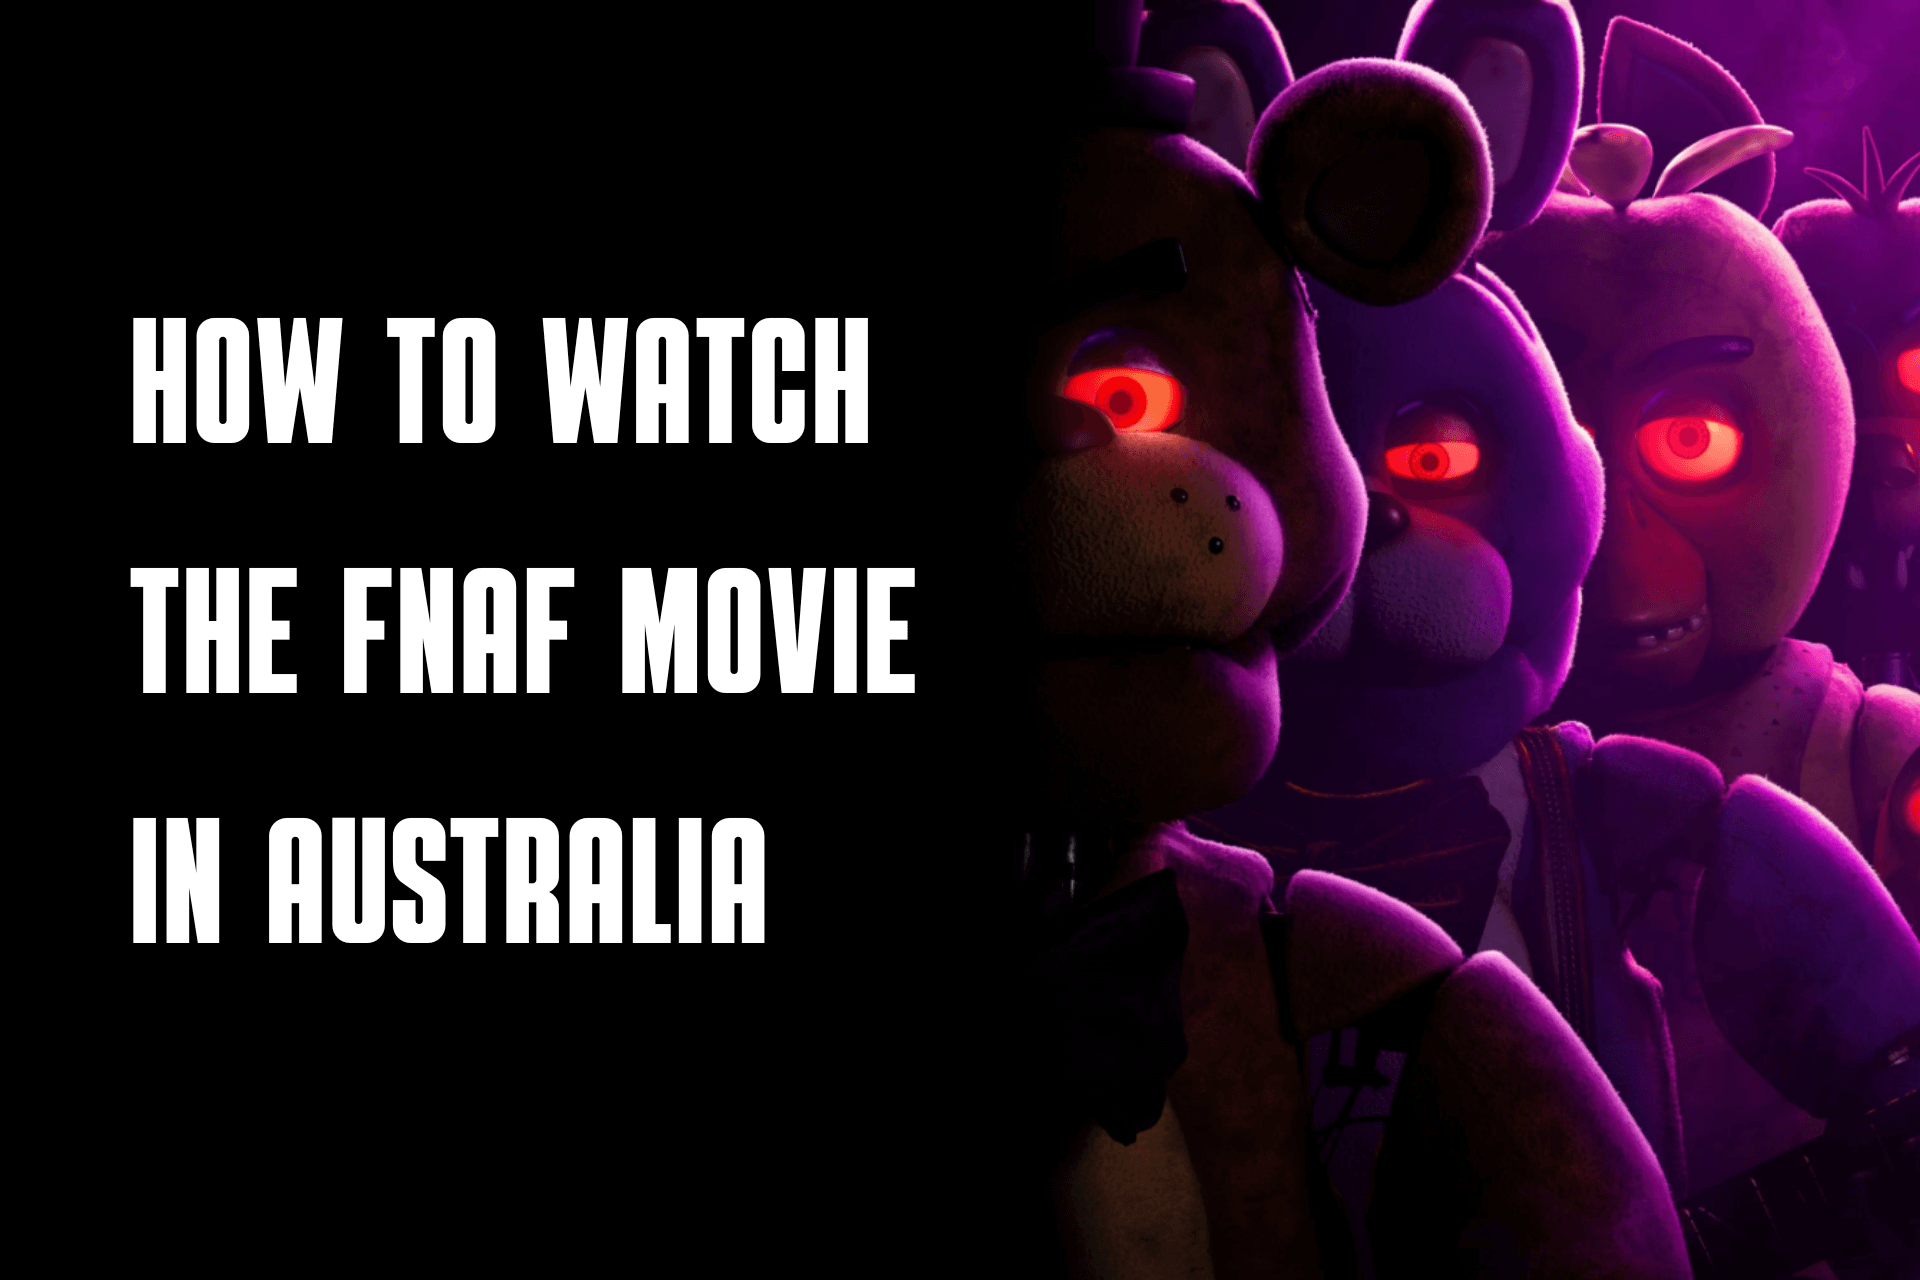 How to Watch the FNaF Movie in Australia [Quick and Easy]